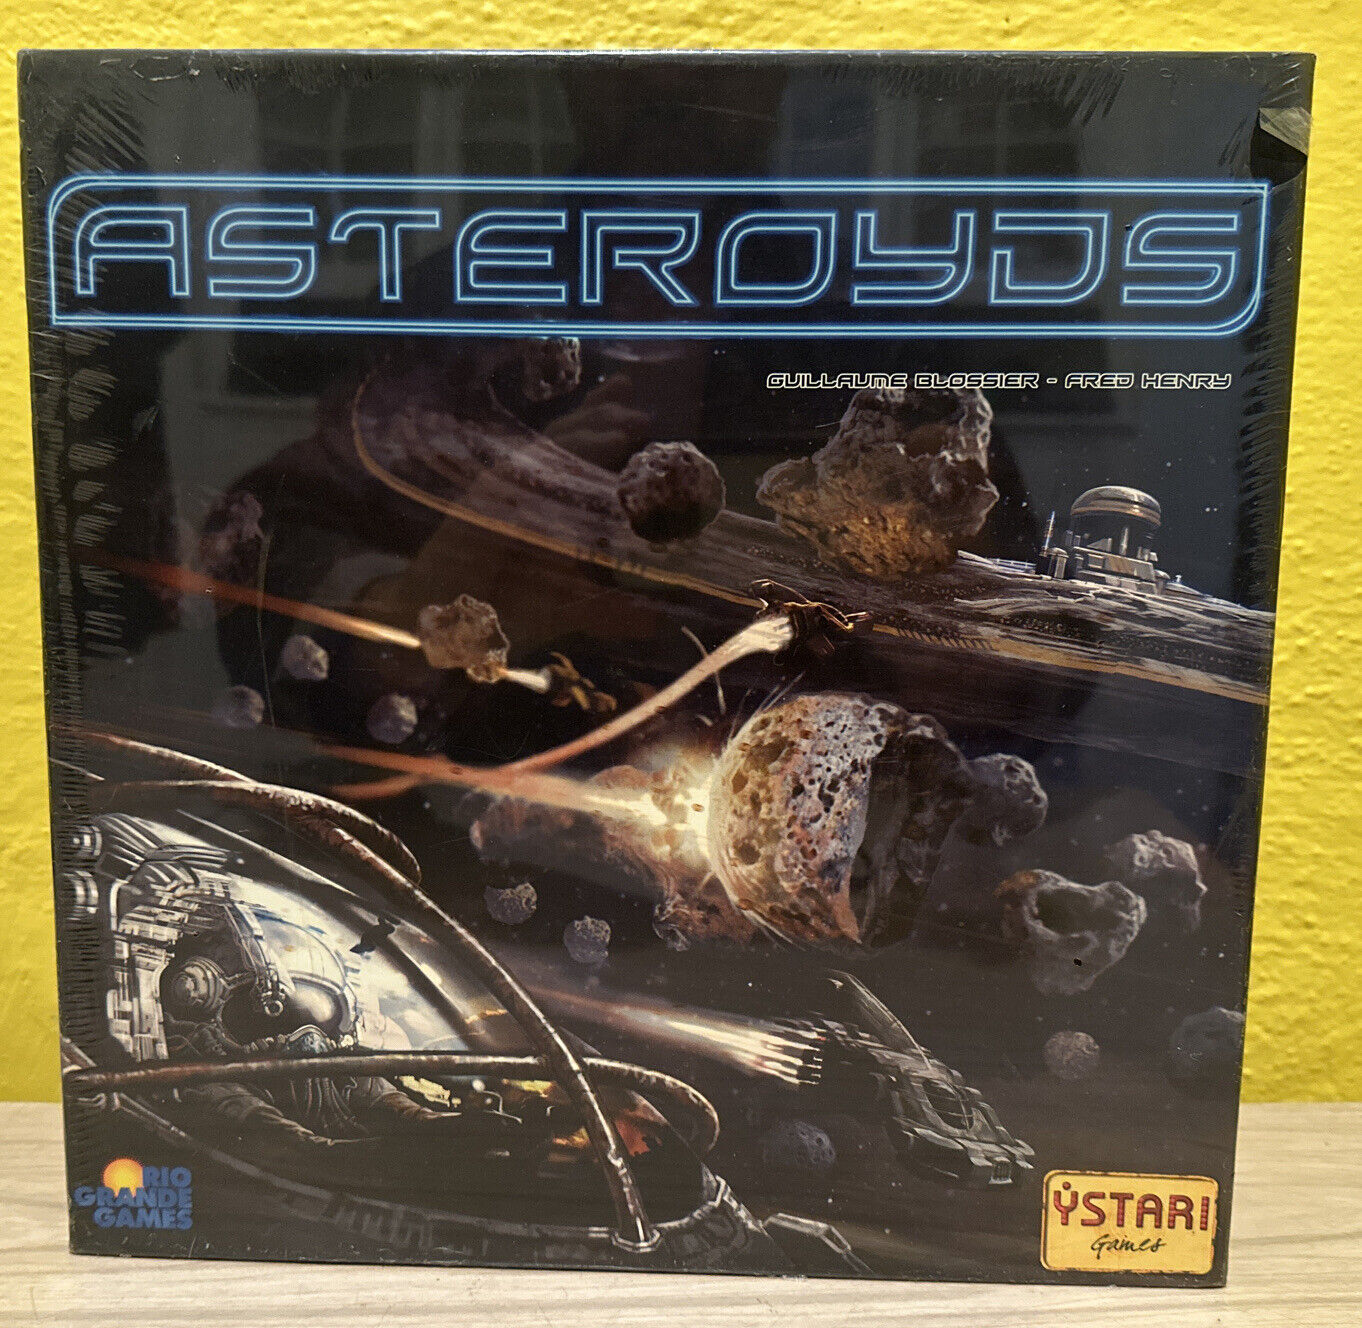 Asteroyds Board Game By Rio Grande Games - Ystari Games - Complete NEW sealed